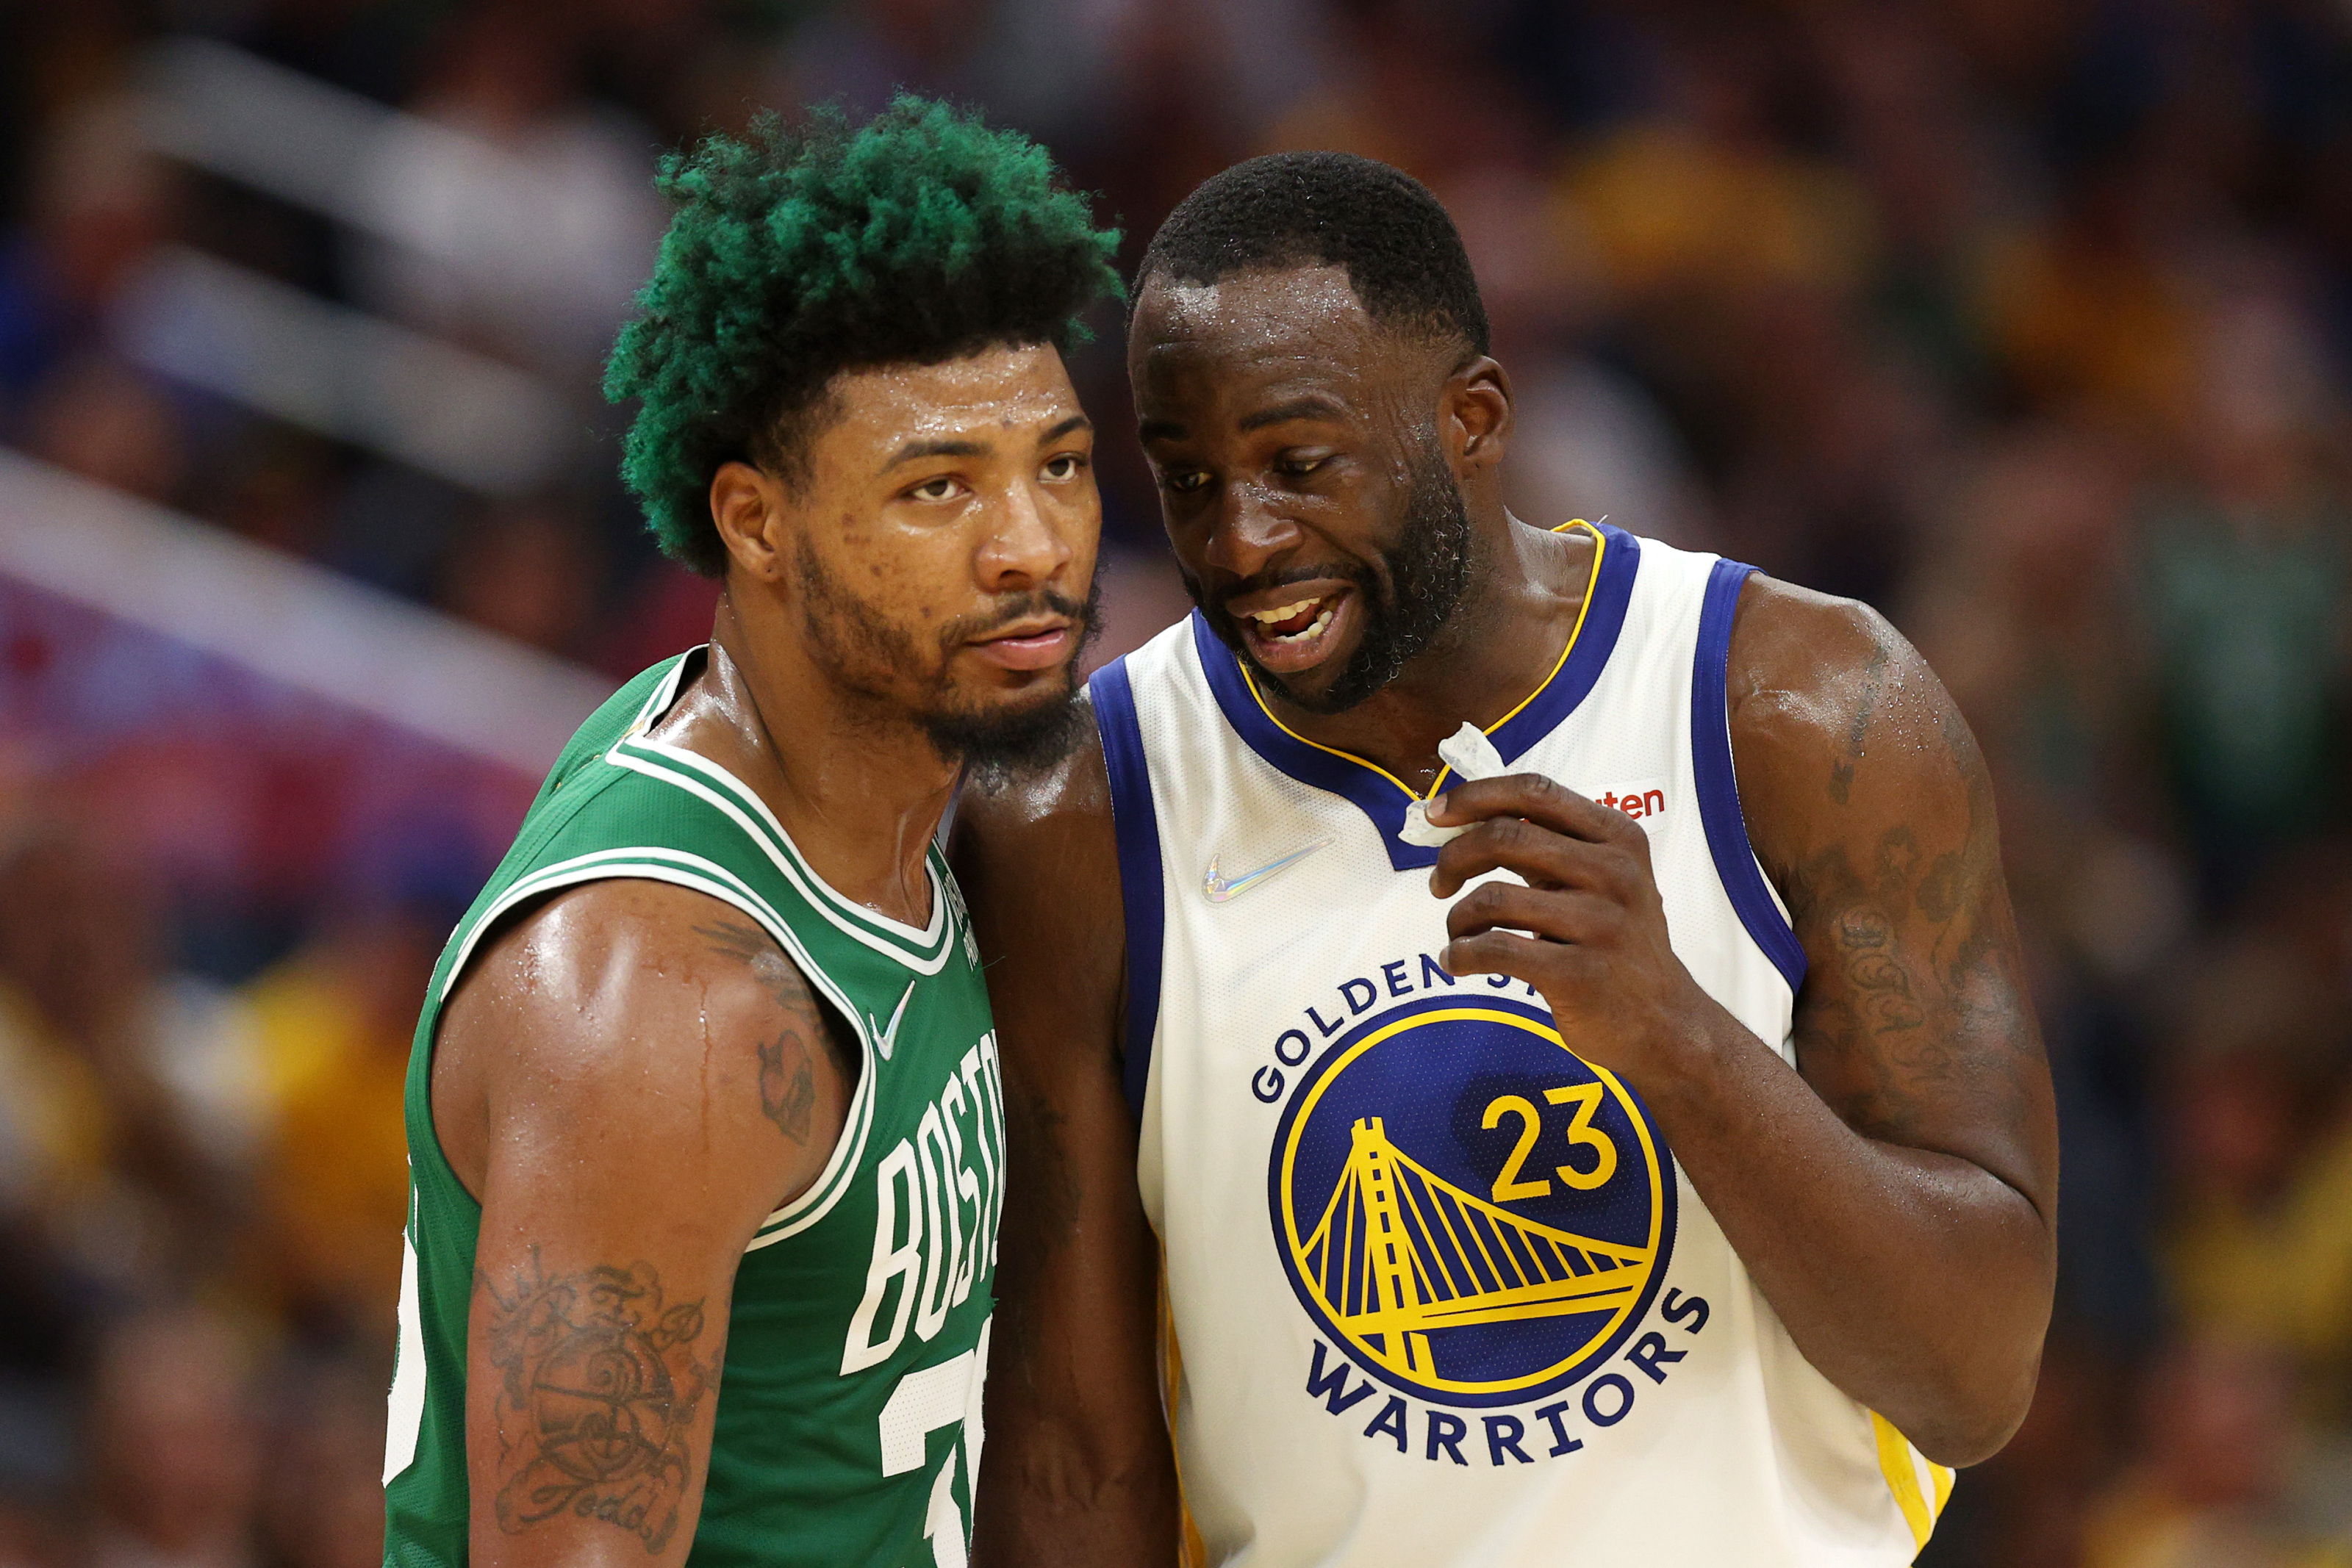 With chemistry and confidence, Boston Celtics just keep getting